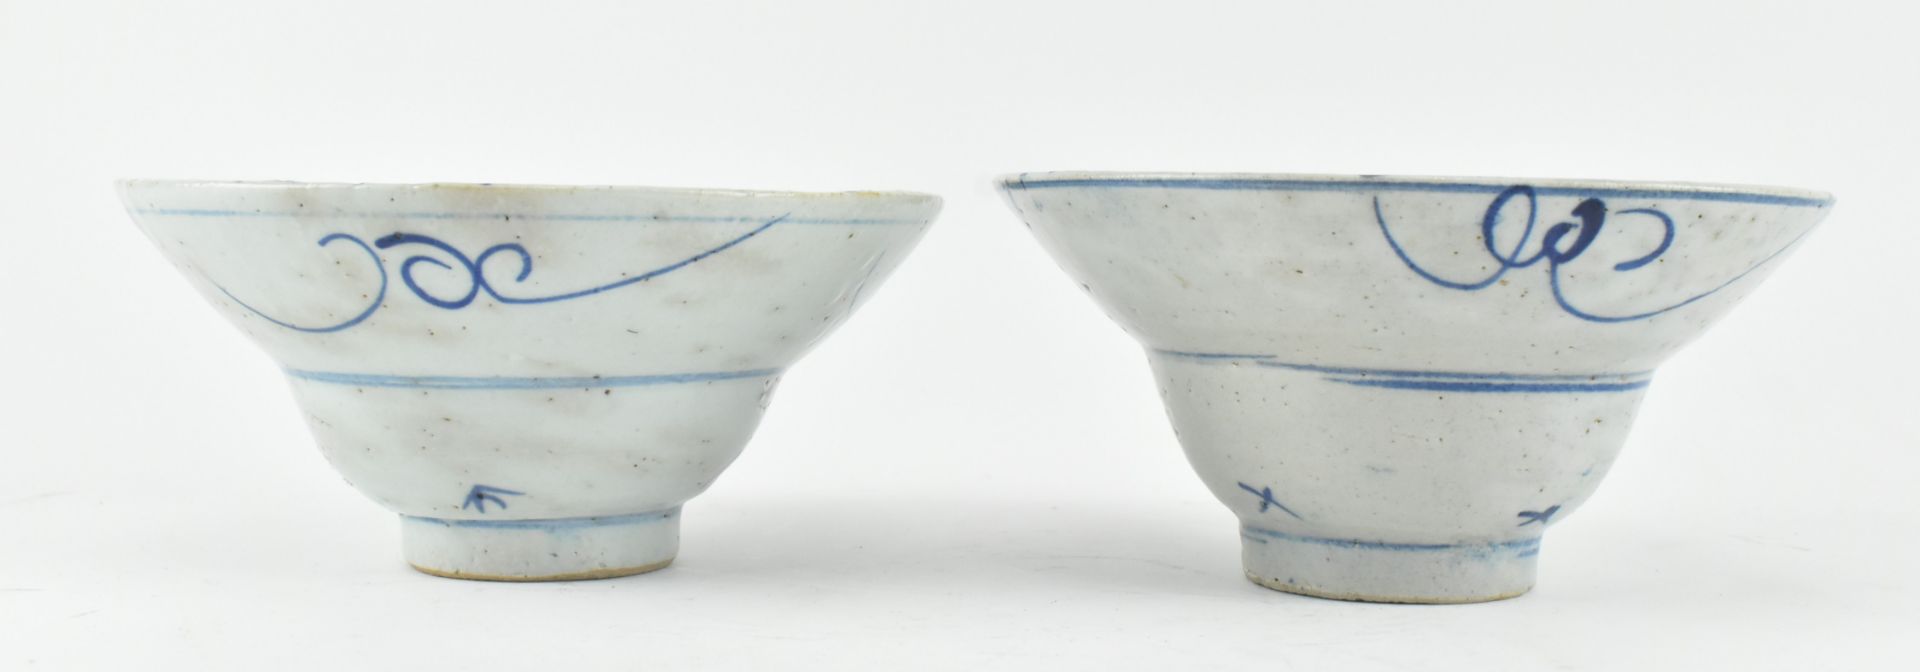 PAIR OF BLUE AND WHITE OGEE SHAPED BOWLS 清 青花折腰碗一对 - Bild 3 aus 7